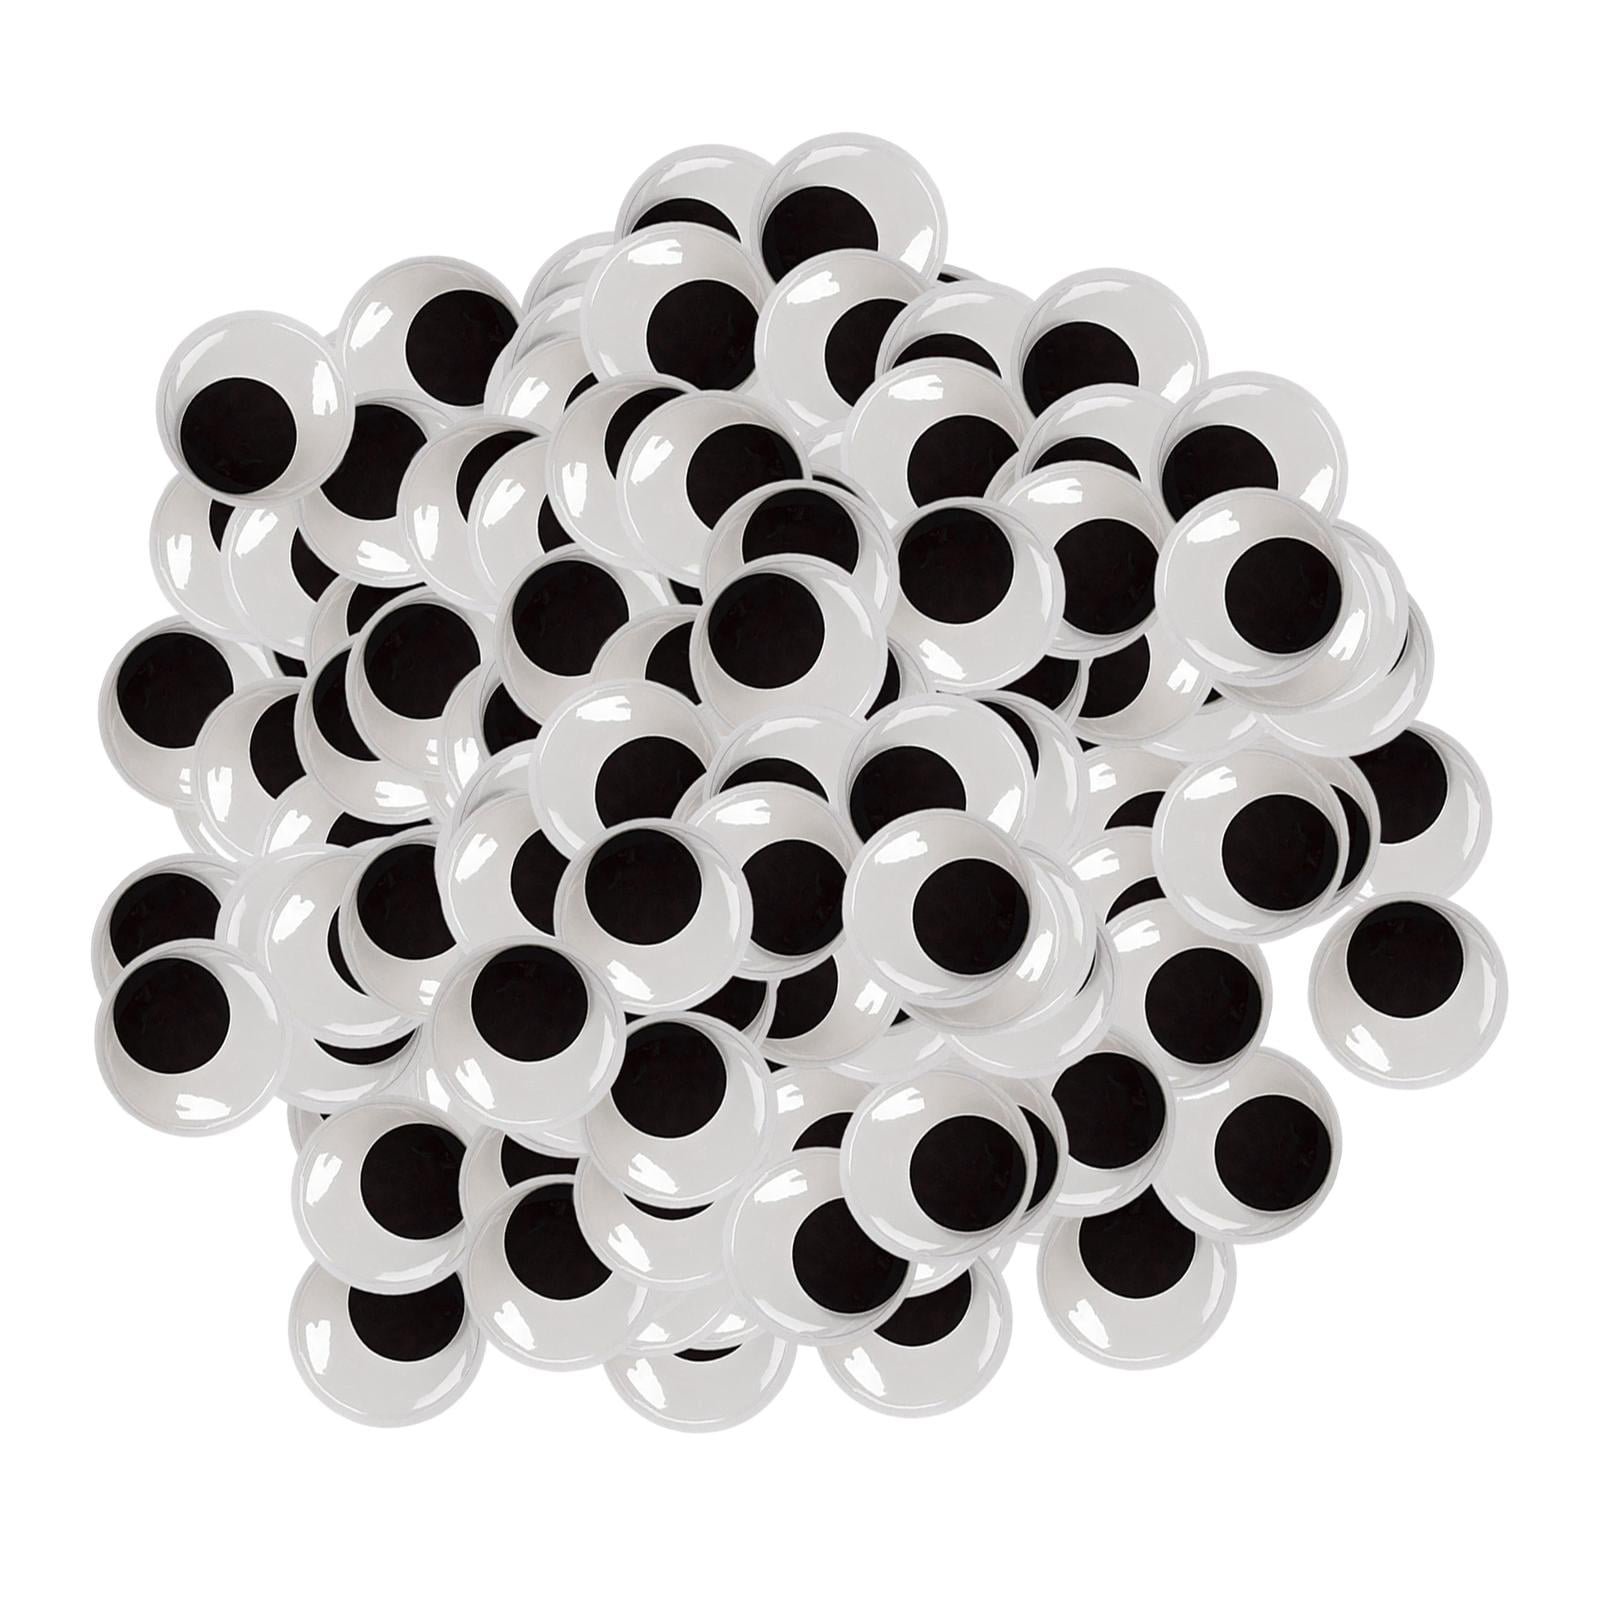 200 Pieces 20mm Black Plastic Wiggle Googly Eyes with Self